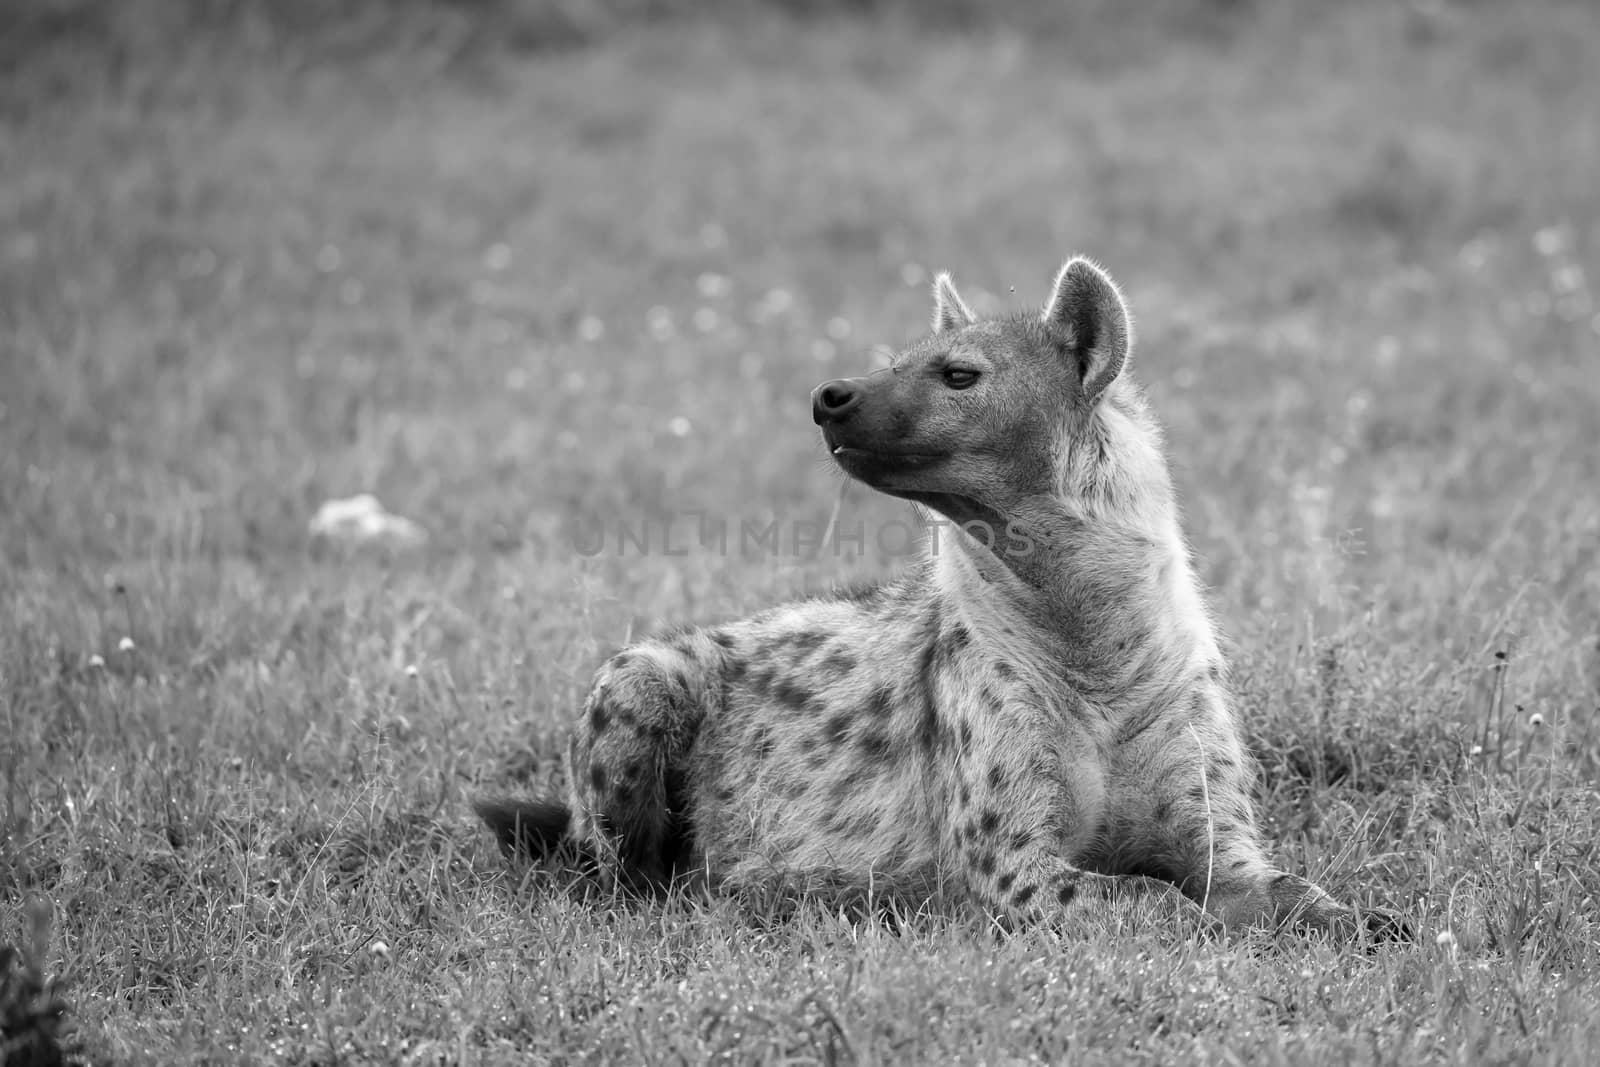 The hyena is lying in the grass in the savannah in Kenya